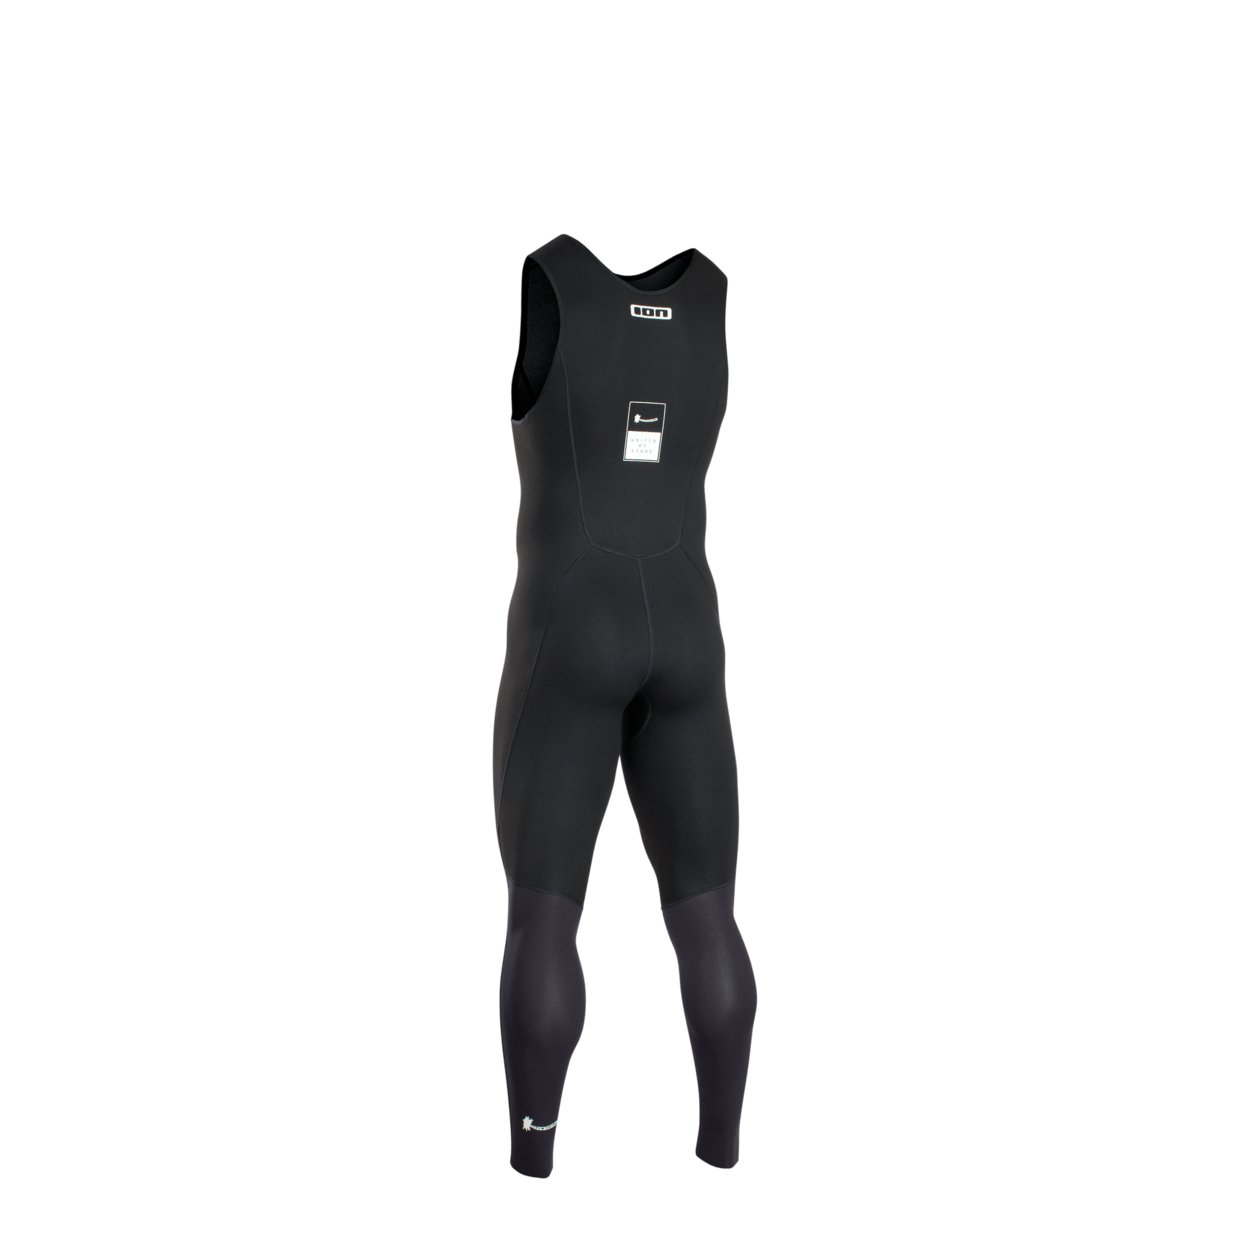 ION Long John Element 2.0 2022 - Worthing Watersports - 9008415881086 - Wetsuits - ION Water